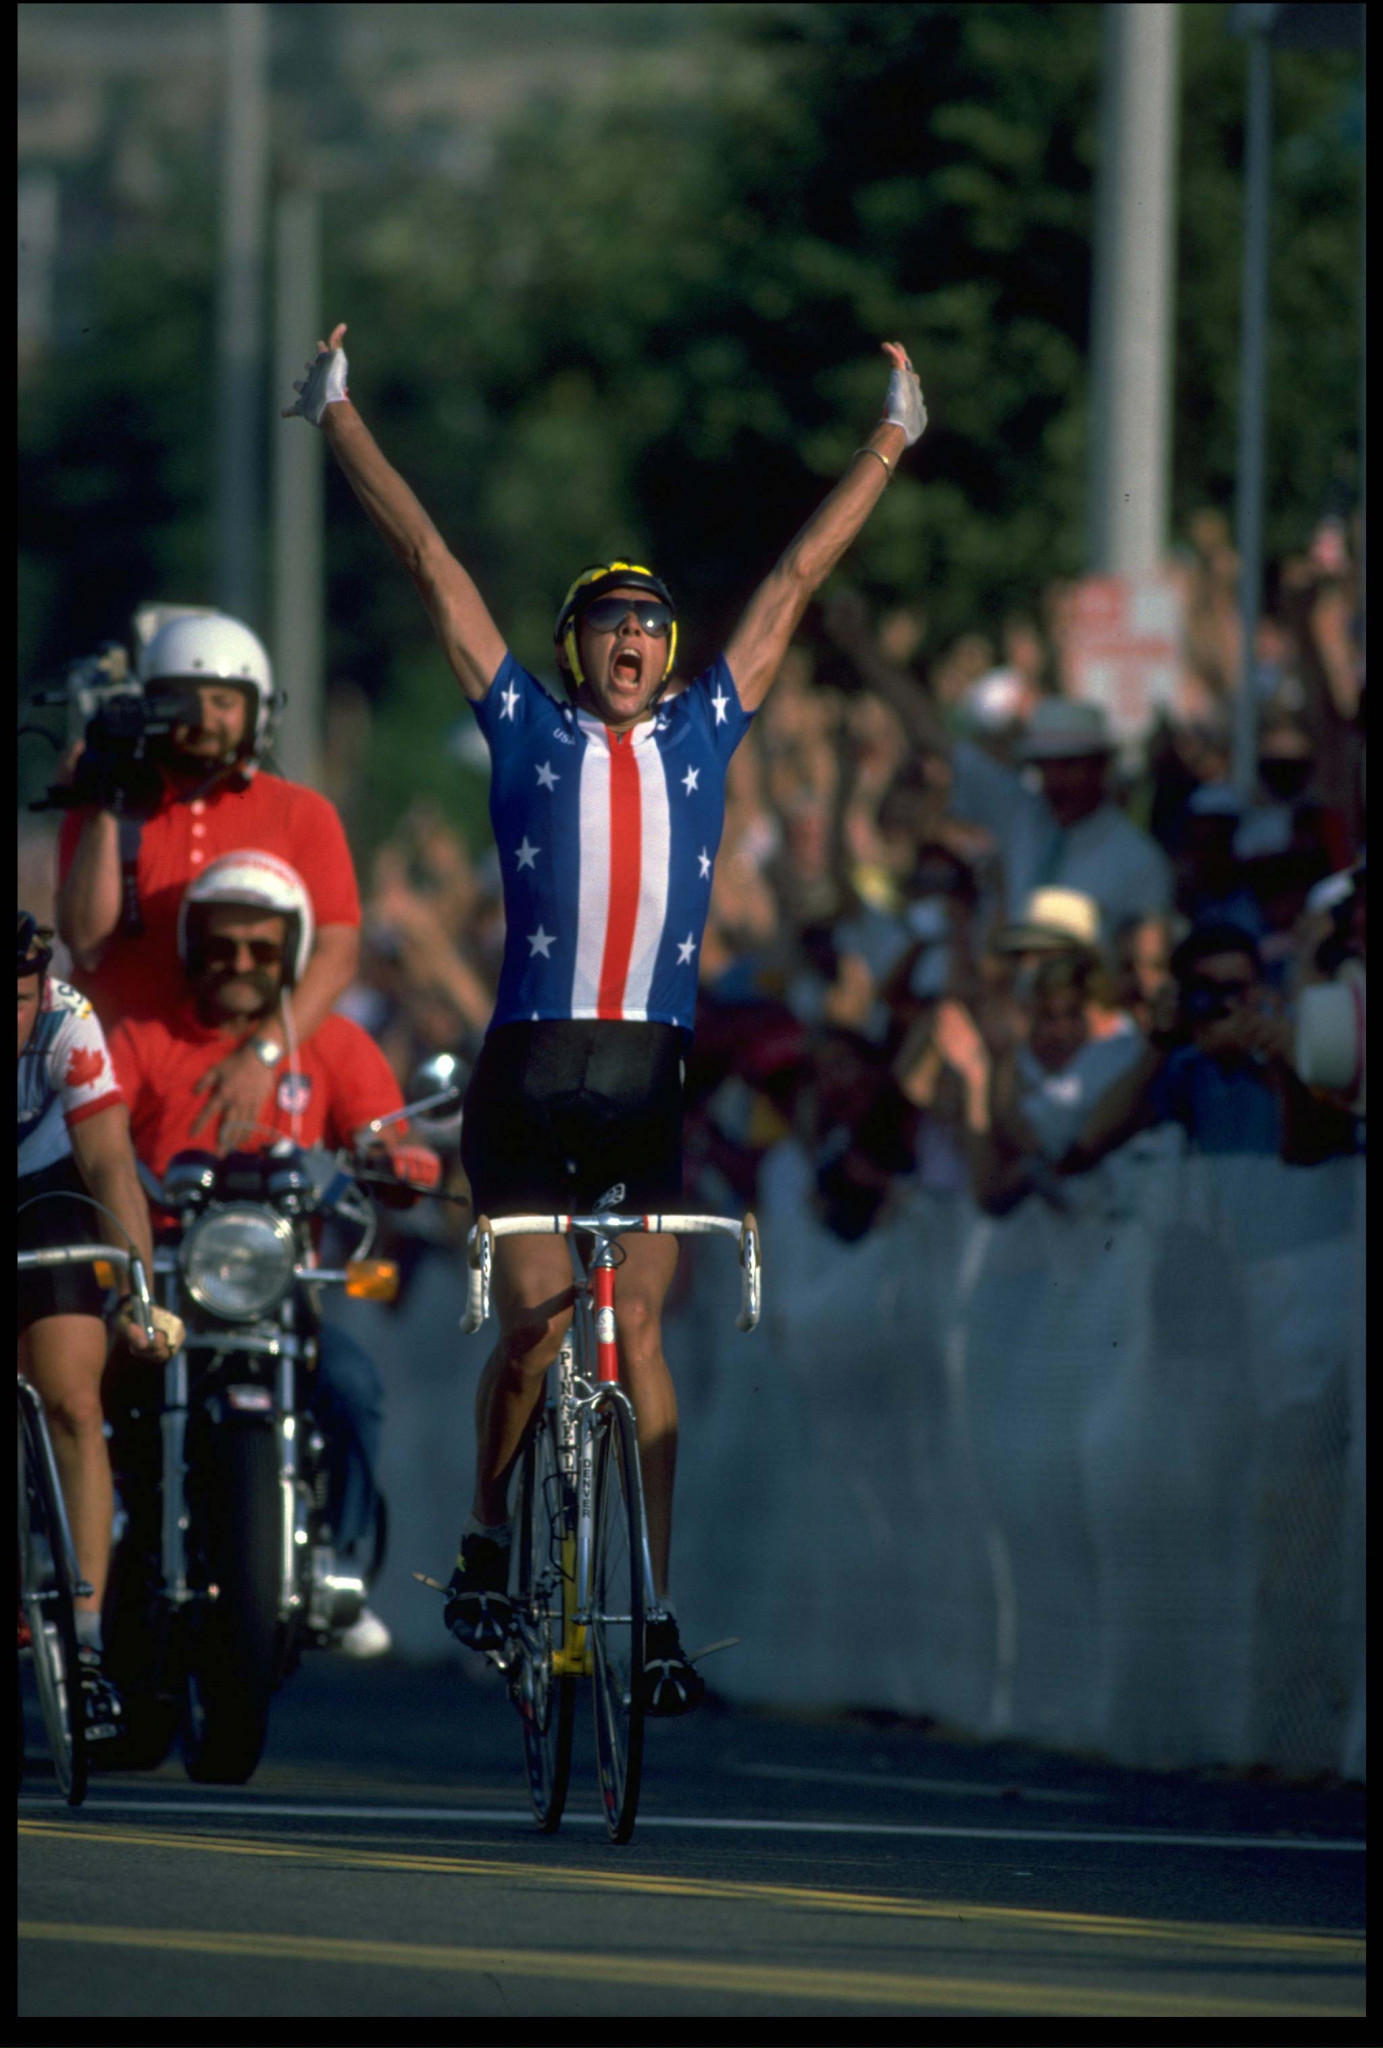 Before Los Angeles 1984, the United States had not won an Olympic cycling medal since Stockholm 1912 but then won four golds, including Alexi Grewal in the men's road race ©Getty Images